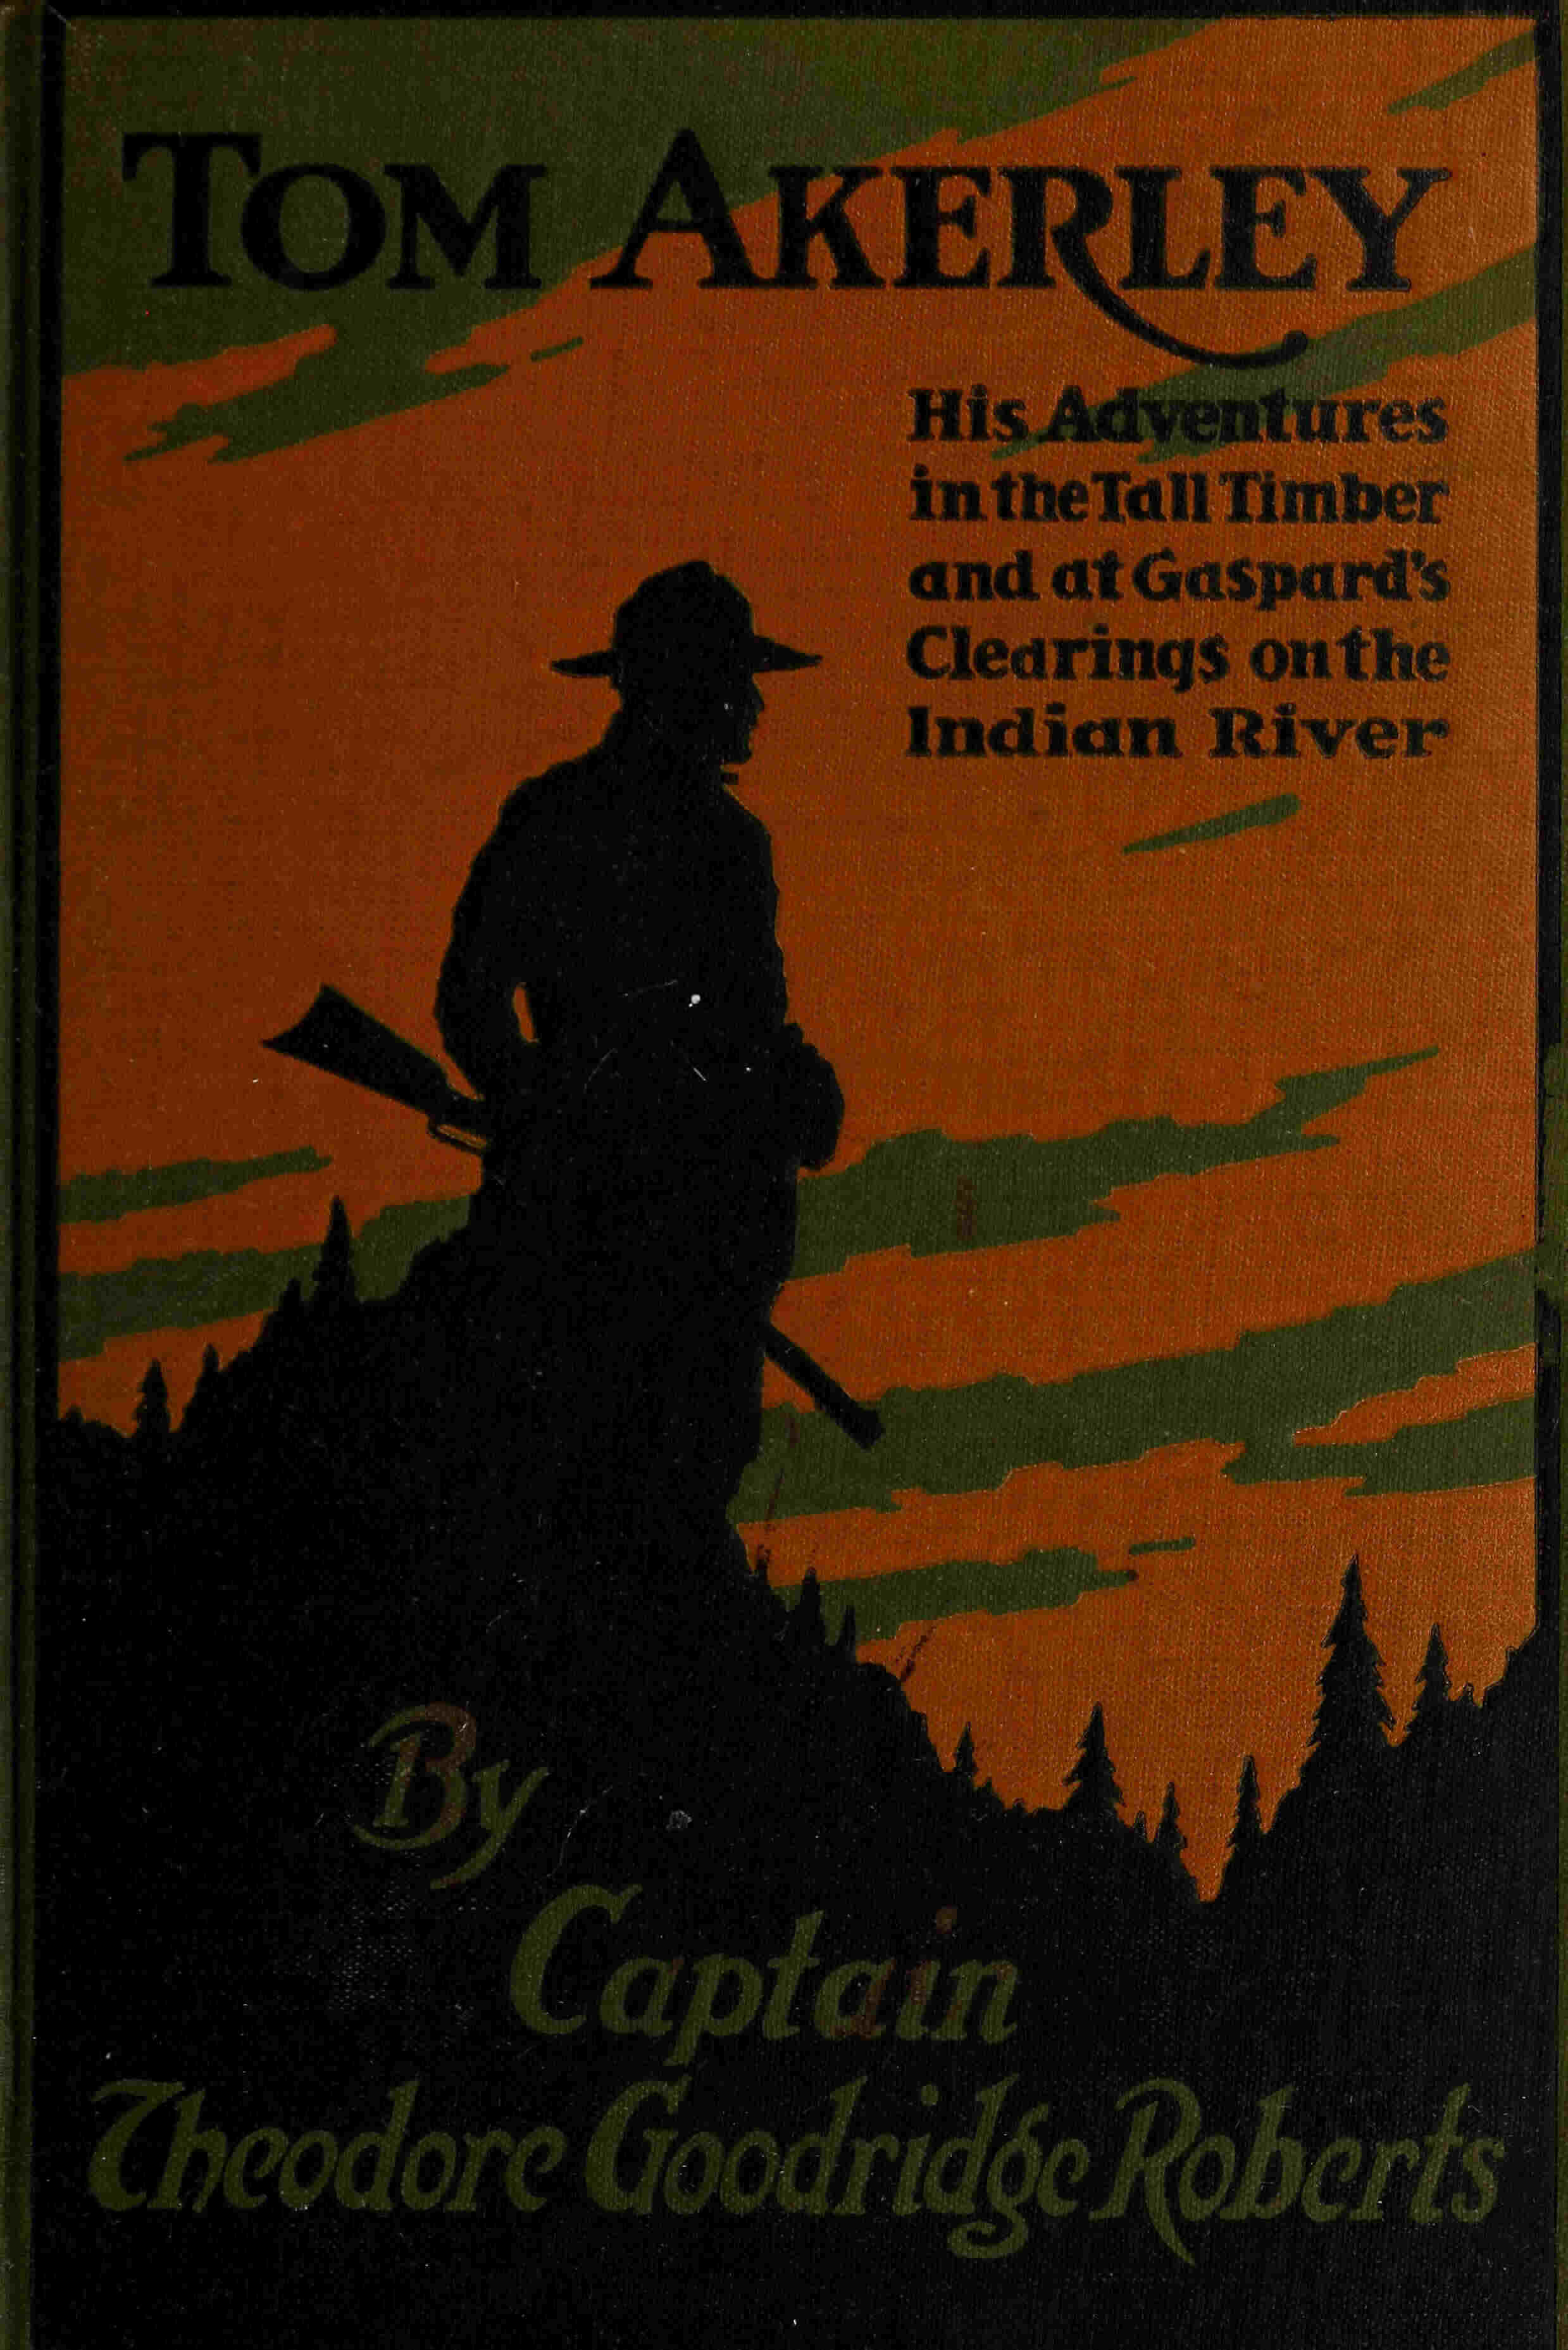 Tom Akerley&#10;His Adventures in the Tall Timber and at Gaspard's Clearing on the Indian River